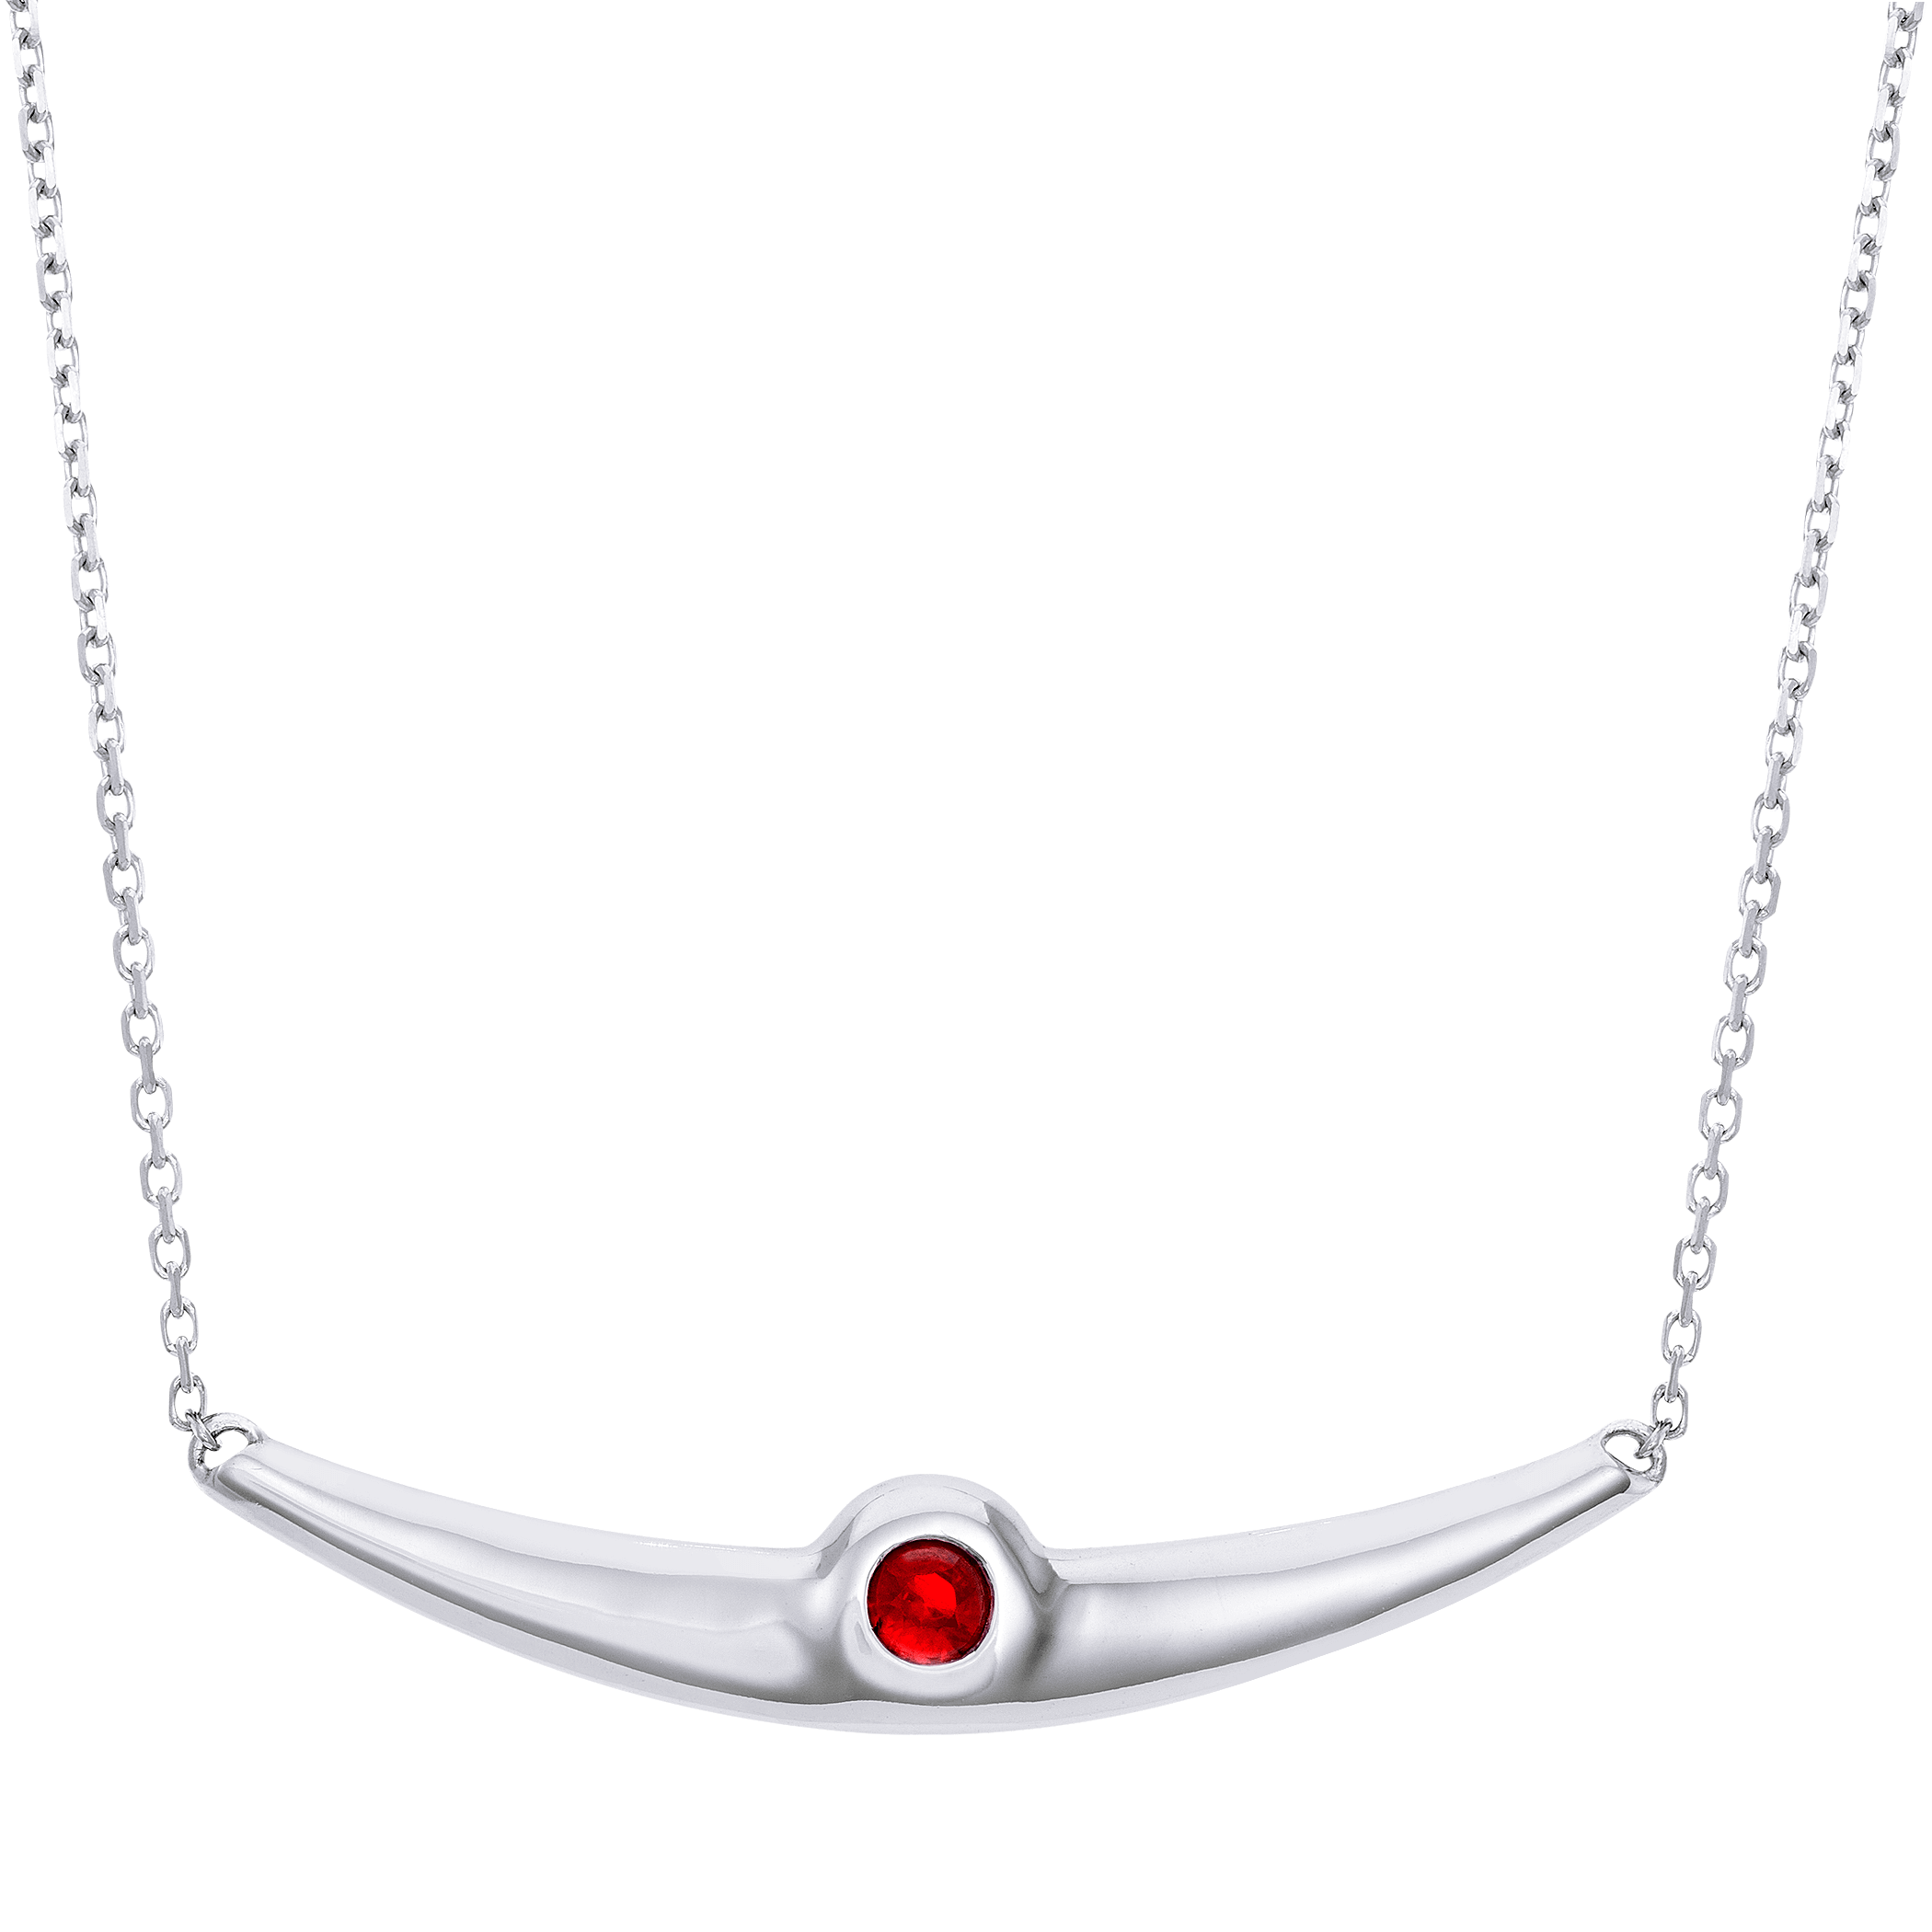 Balsano Jewelry, A Beautiful Smile, Sterling Silver Ruby Pendant